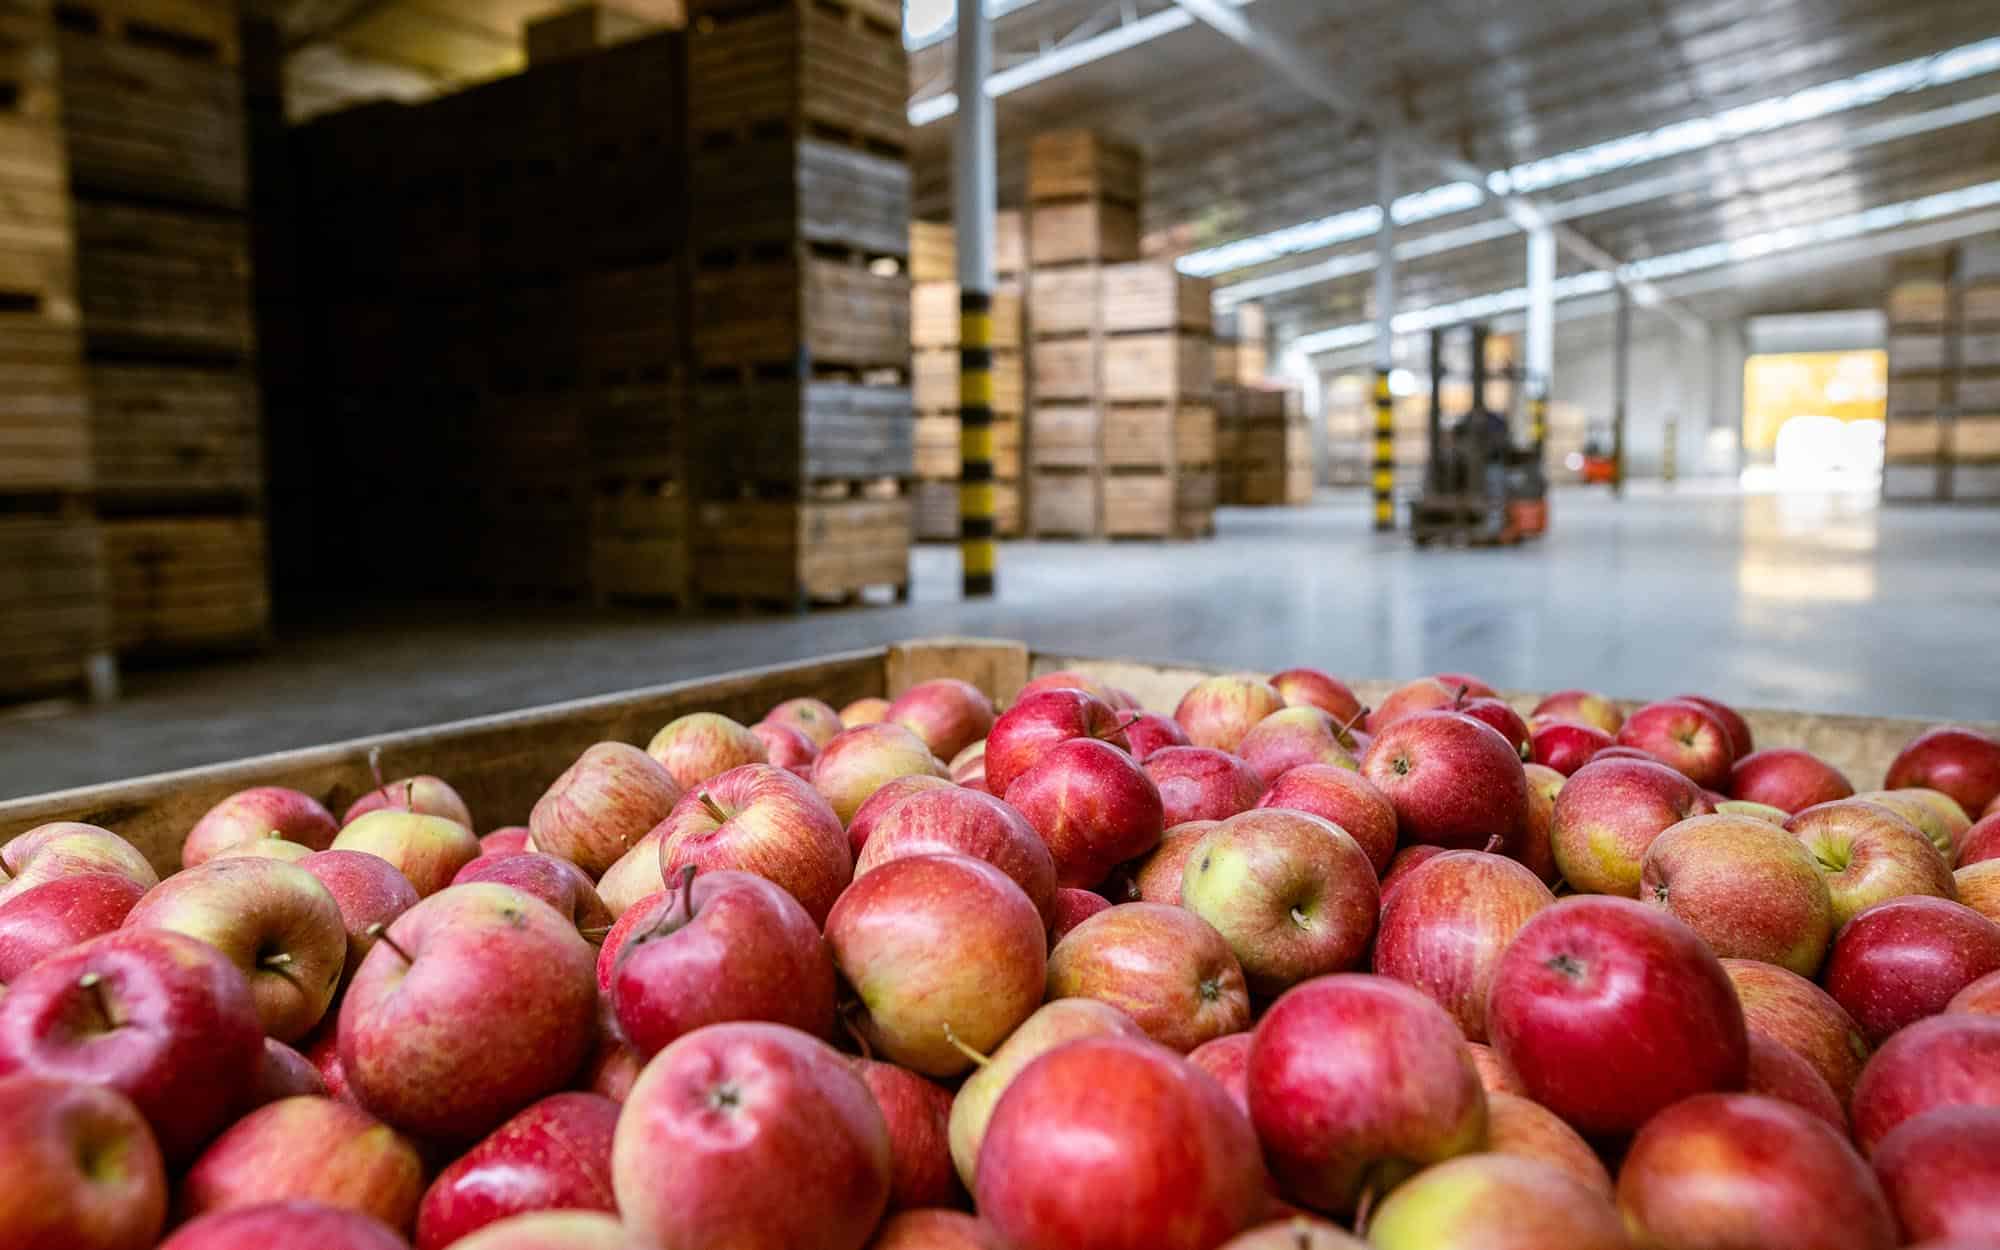 Image Of Boxed Apples In A Food Grade Warehouse.